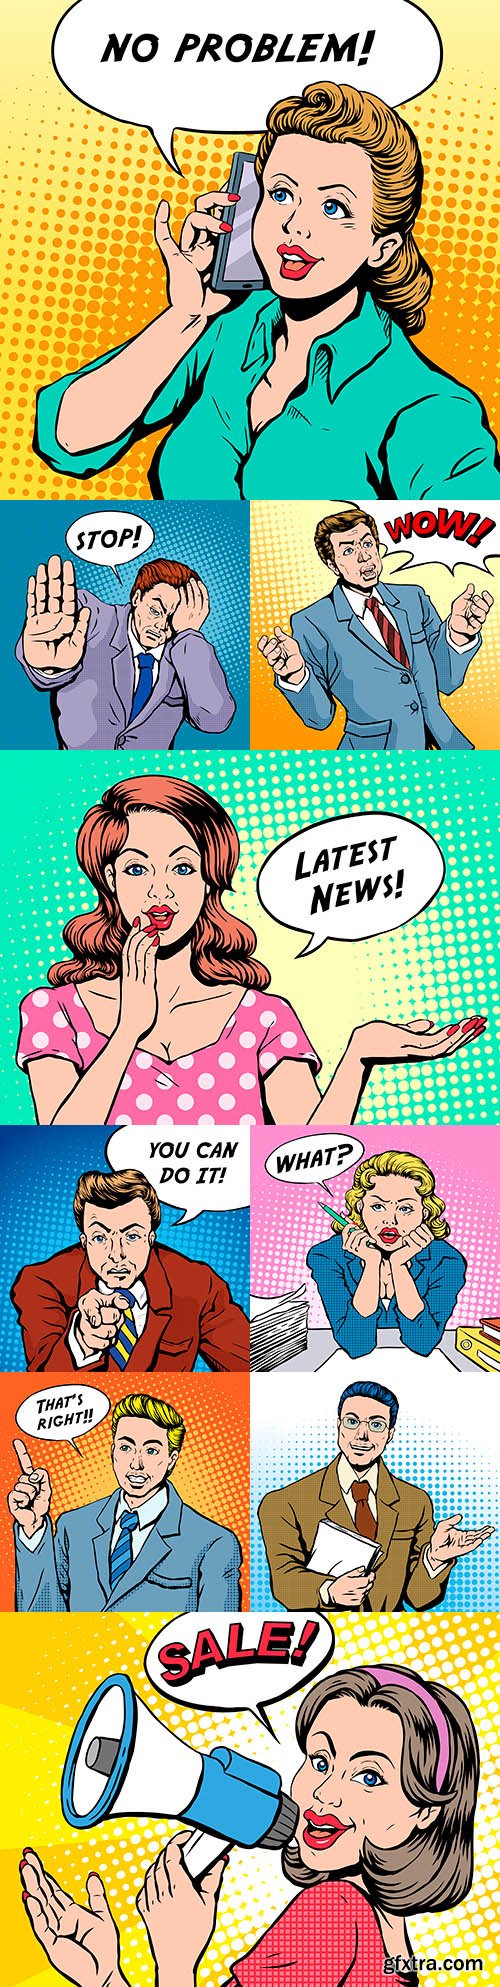 Woman and Man Pop art illustration with speech forms